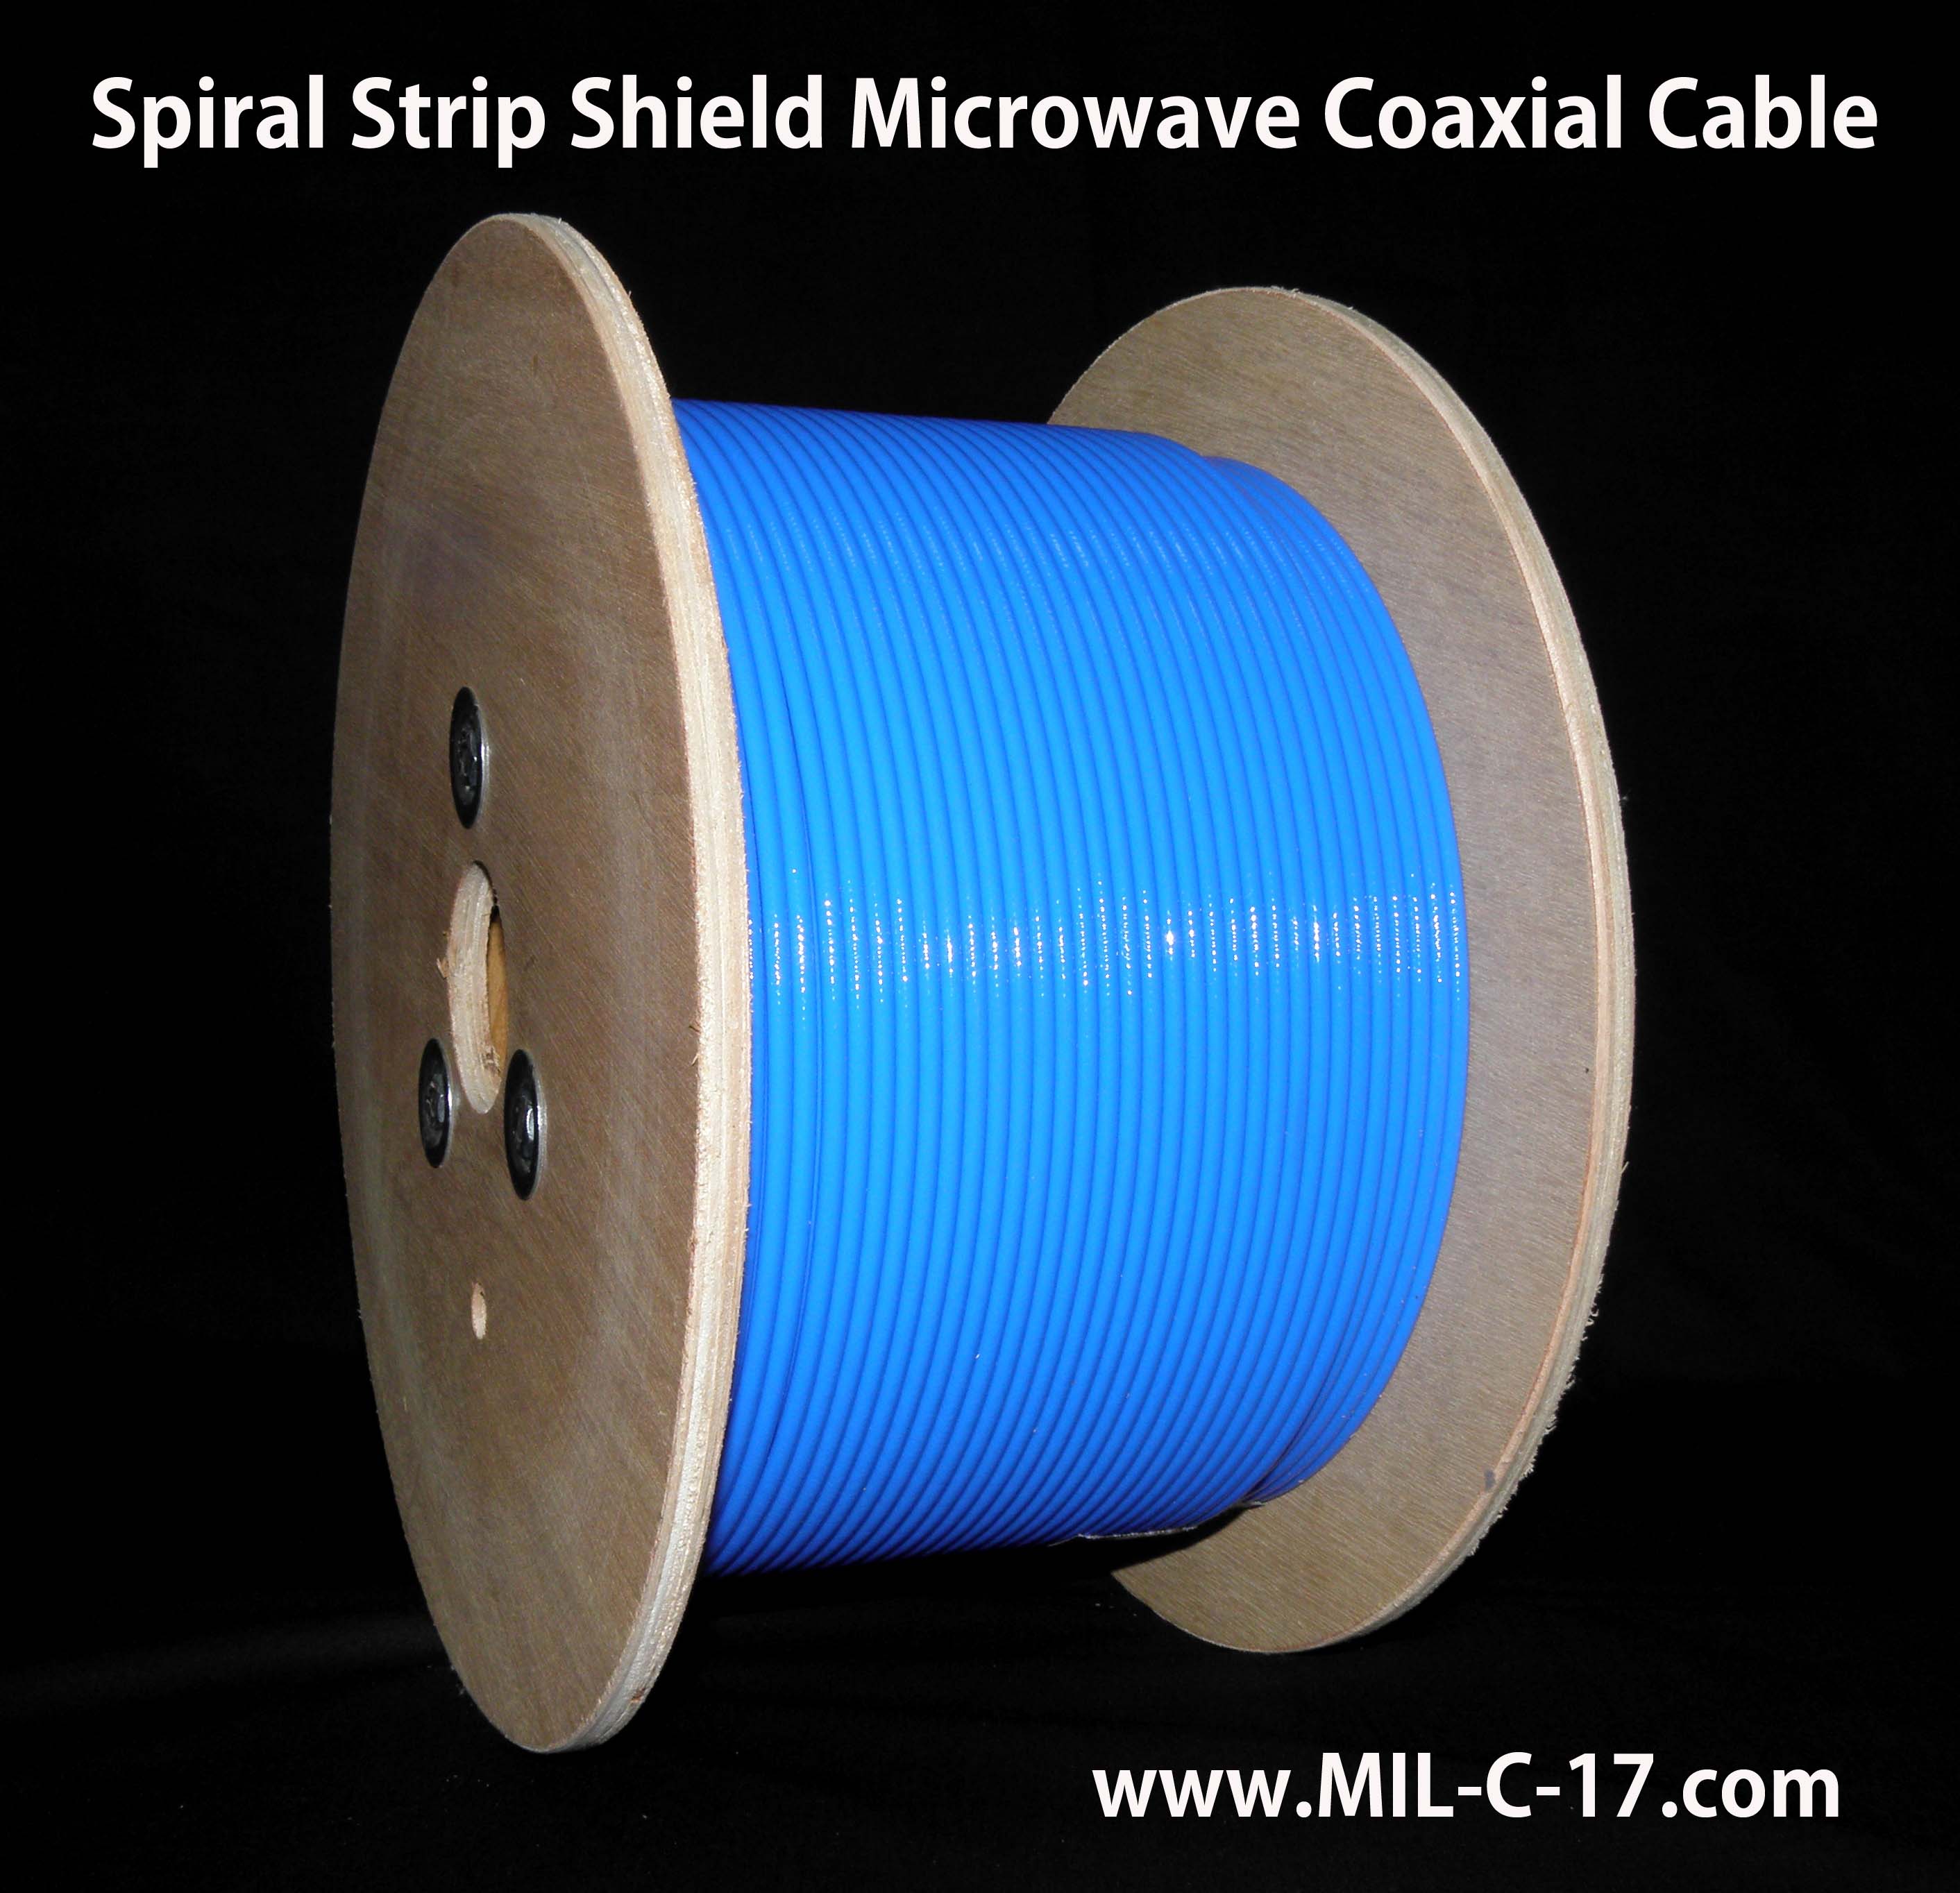 SS402 Cable, SS405 Cable, Spiral Strip Cable, Spiral Strip Shield Microwave Cable, Spiral Strip Shield Cable, RG-402SS, RG-405SS, Tflex-405, Tflex-402, Multiflex 86, Multibend 405, Multiflex 141, Multibend 402, Harbour Cable, Harbour Industries, Habia Cable, HuberSuhner Cable